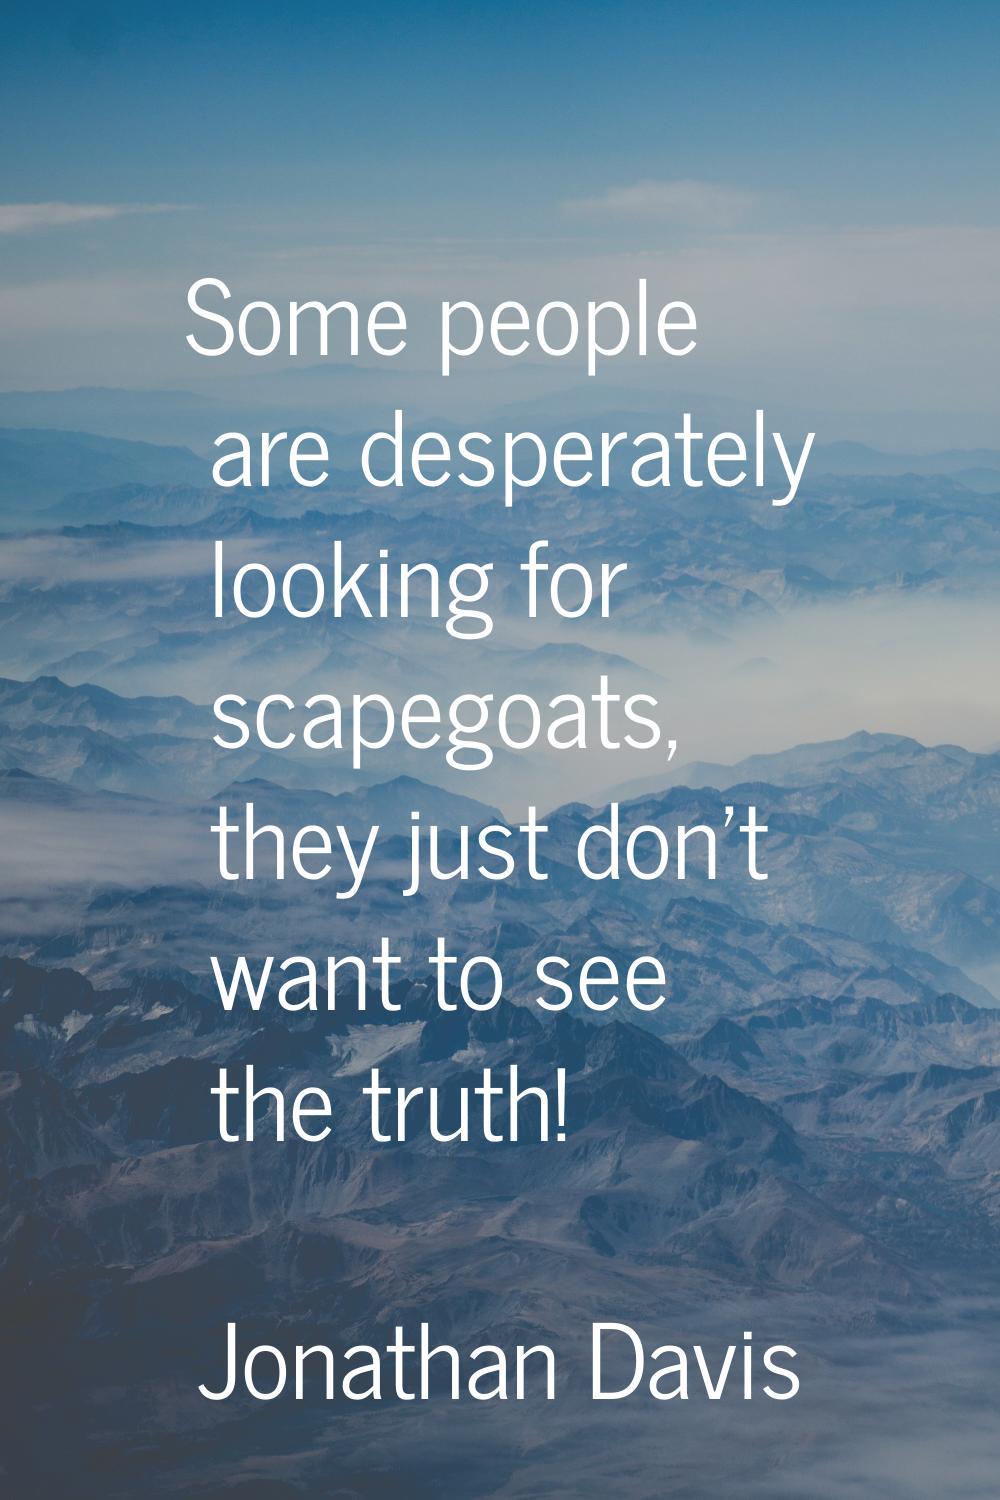 Some people are desperately looking for scapegoats, they just don't want to see the truth!